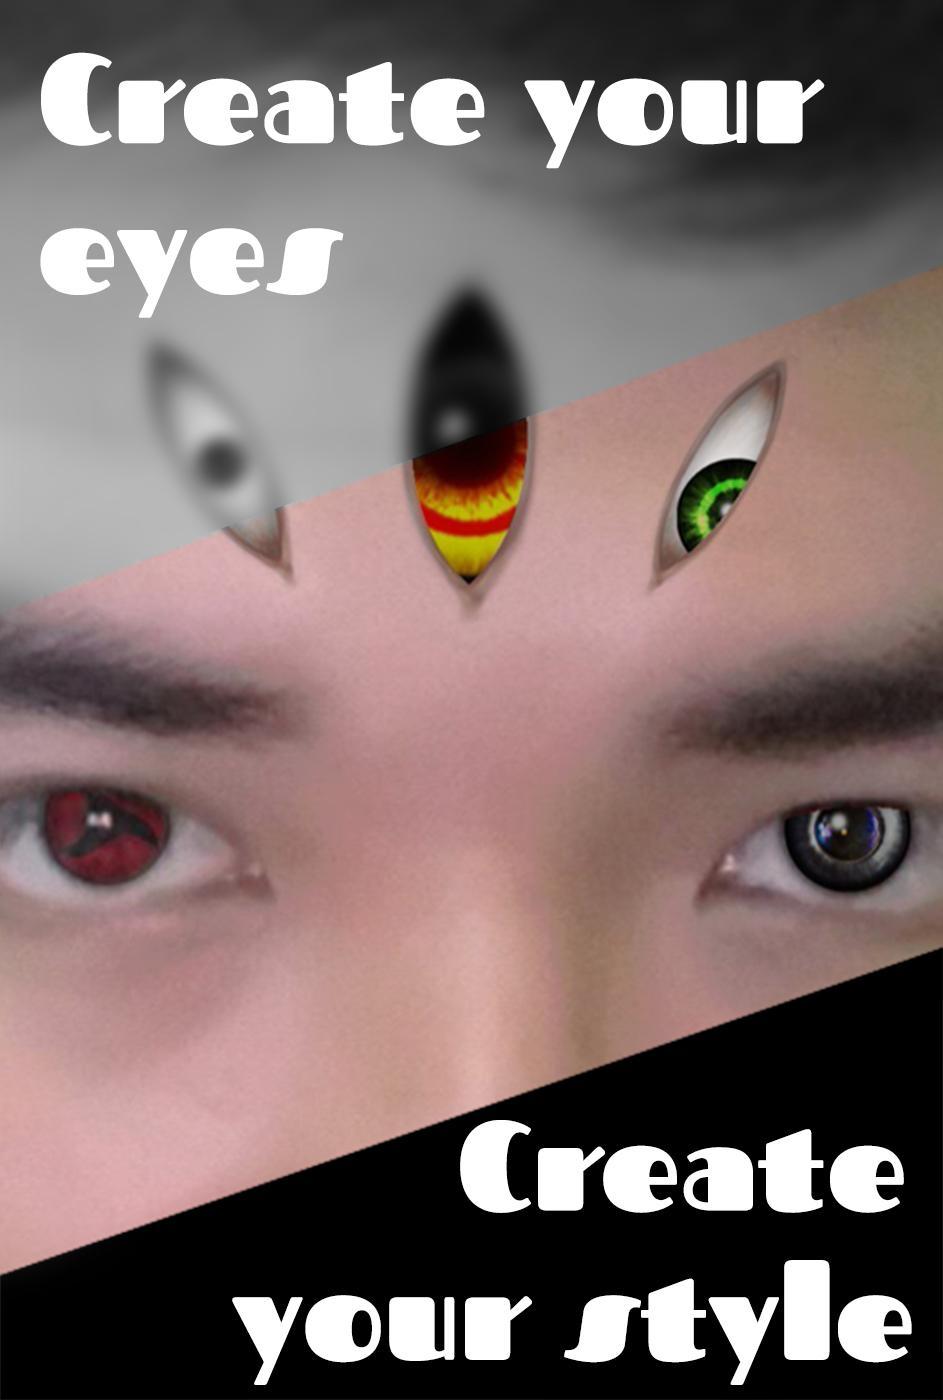 FoxEyes - Change Eye Color by Real Anime Style 2.9.1.1 Screenshot 13